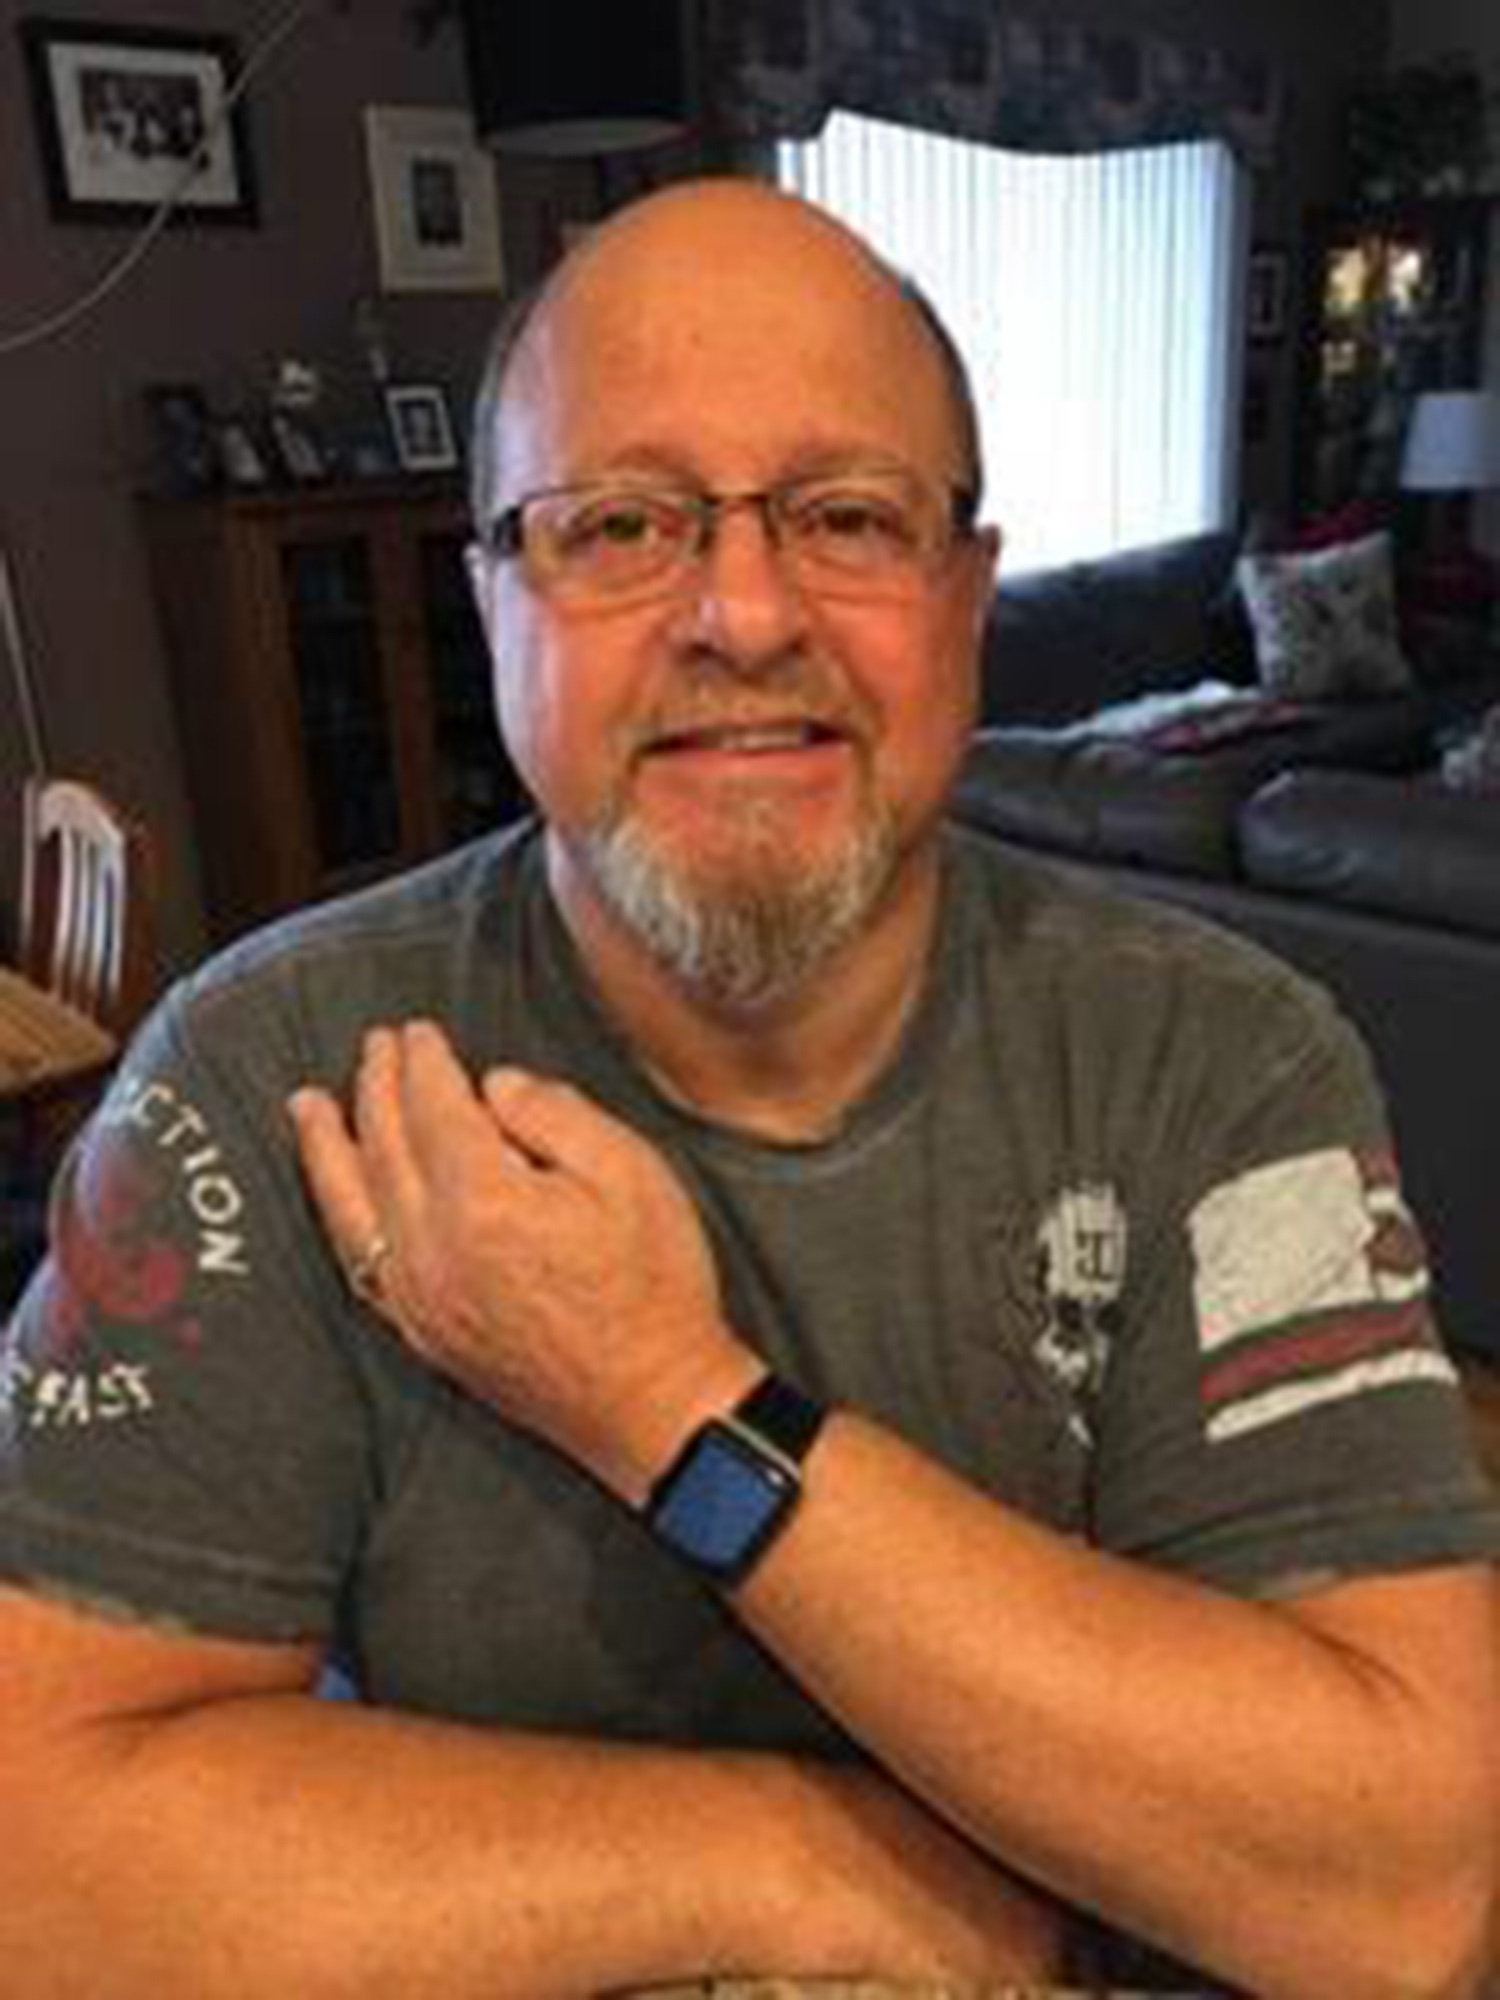 Apple Watch Saves Another Man's Life